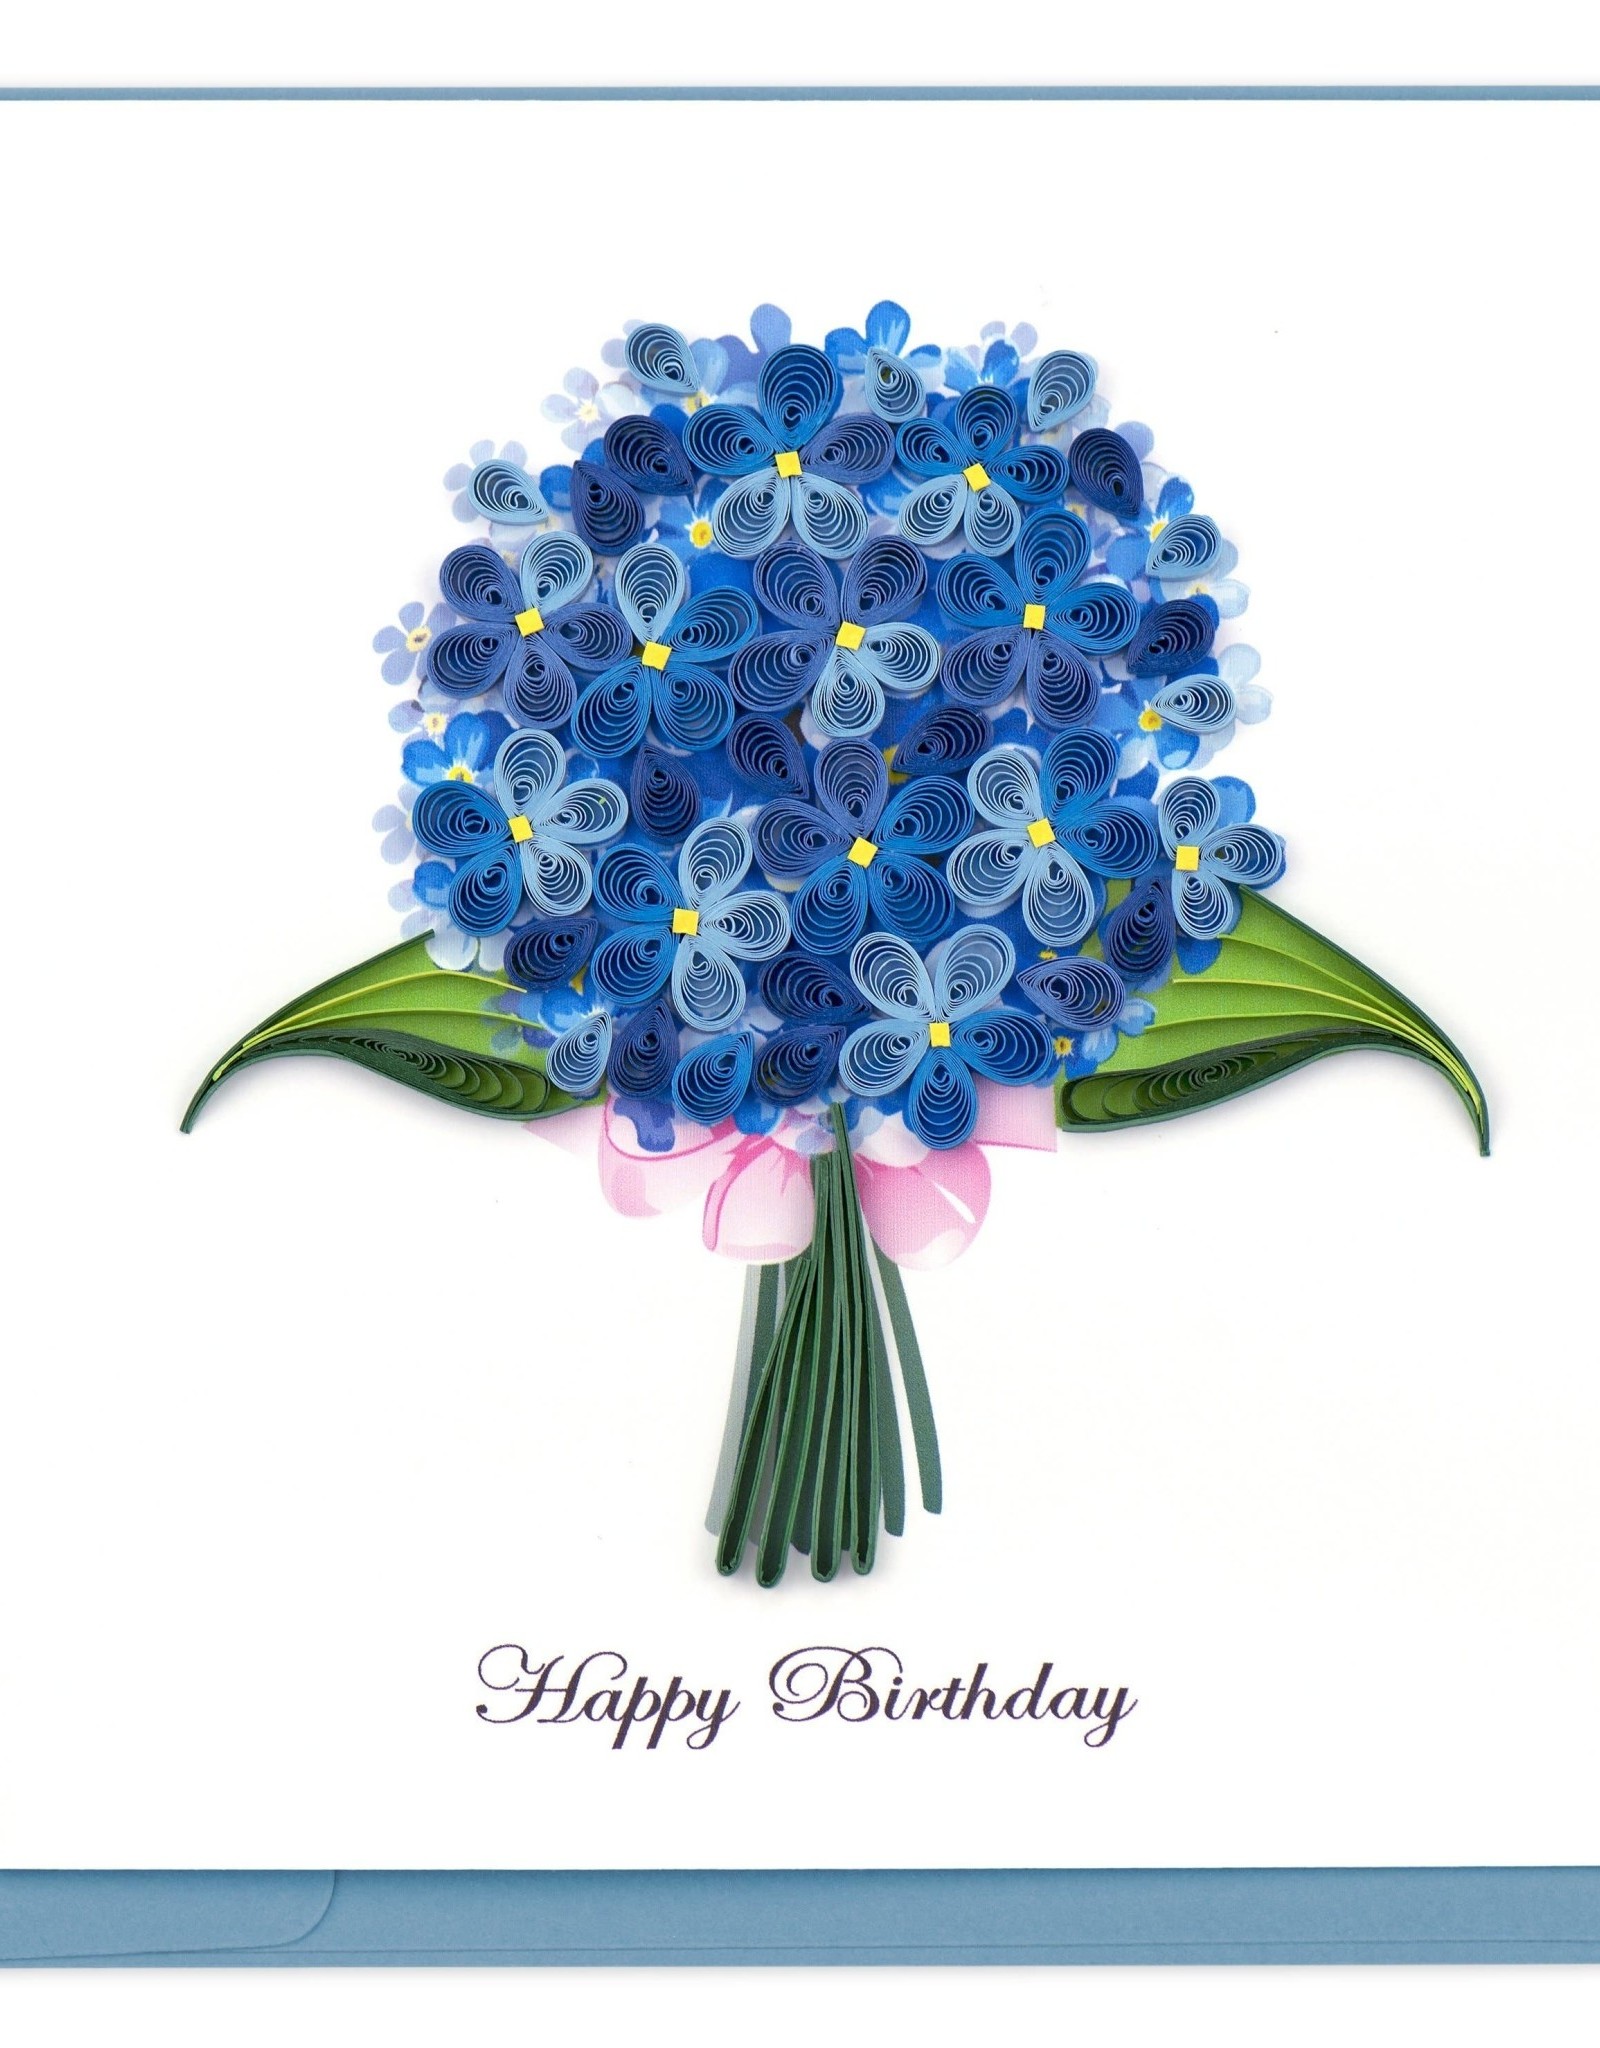 Quilling Card Quilled Birthday Hydrangeas Greeting Card